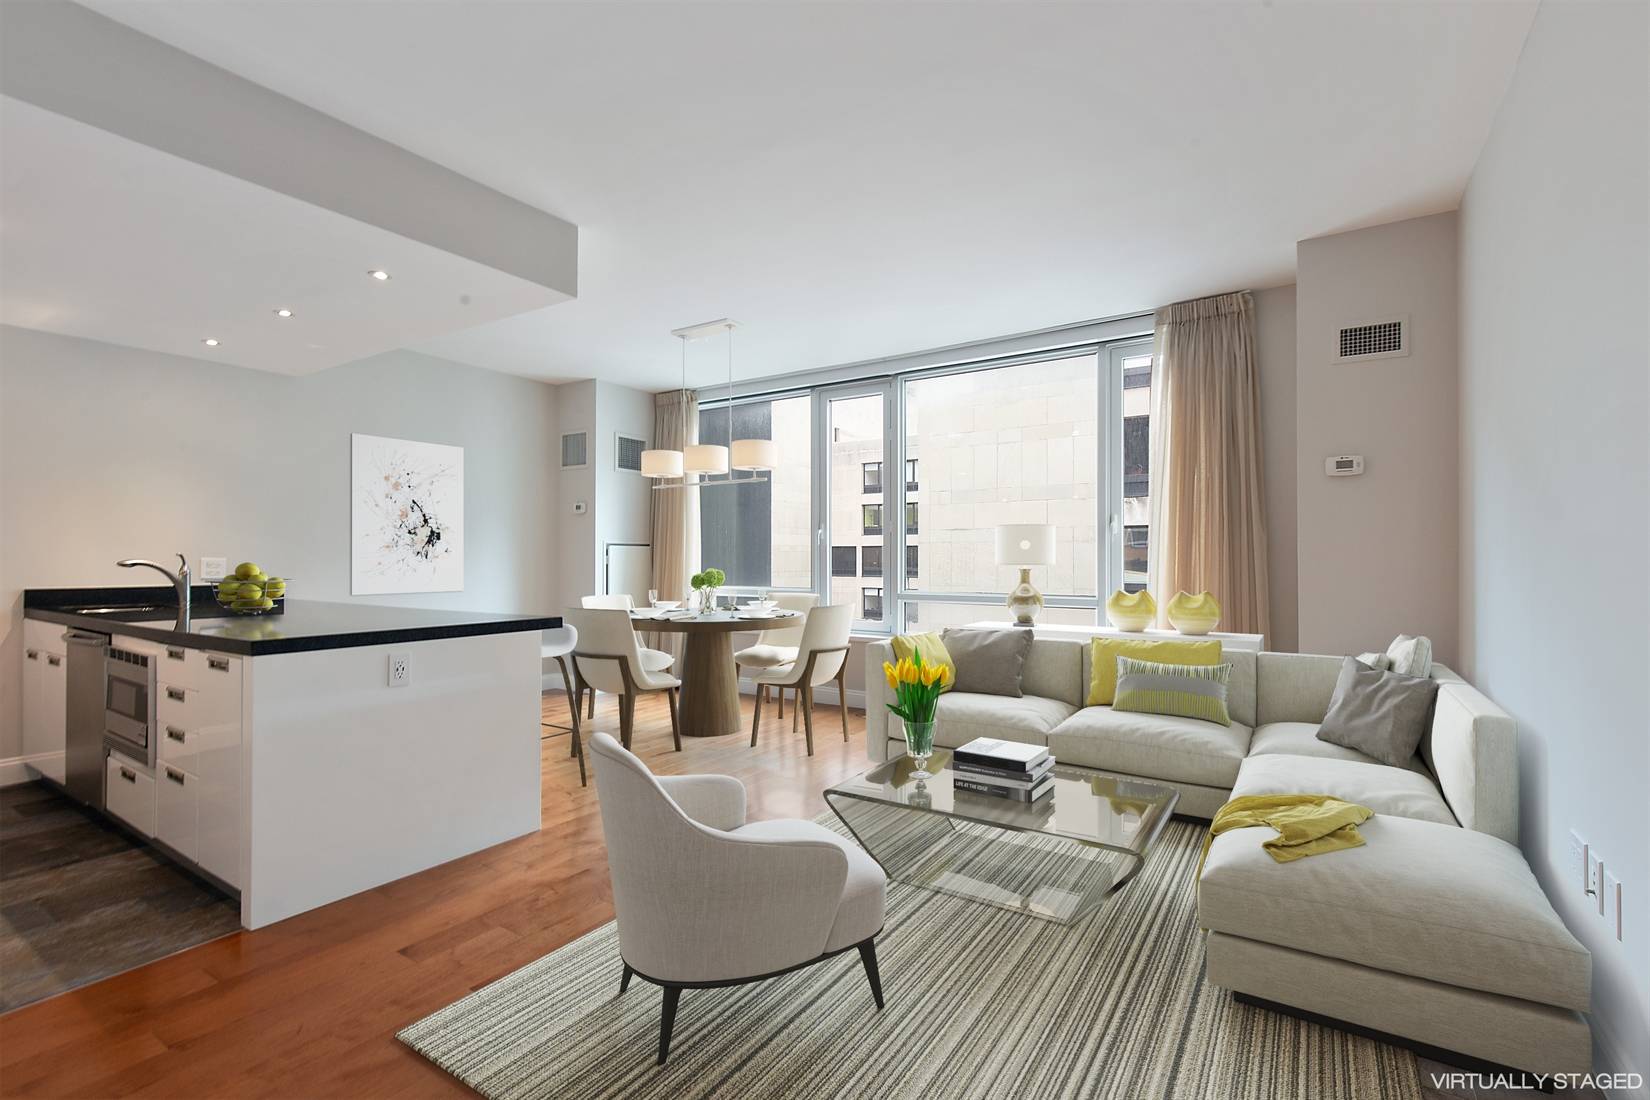 This South Facing light filled apartment has two pin drop quiet bedrooms, two and a half bathrooms, brand new Mirage maple wide plank wood floors, new porcelain tiled kitchen floor ...